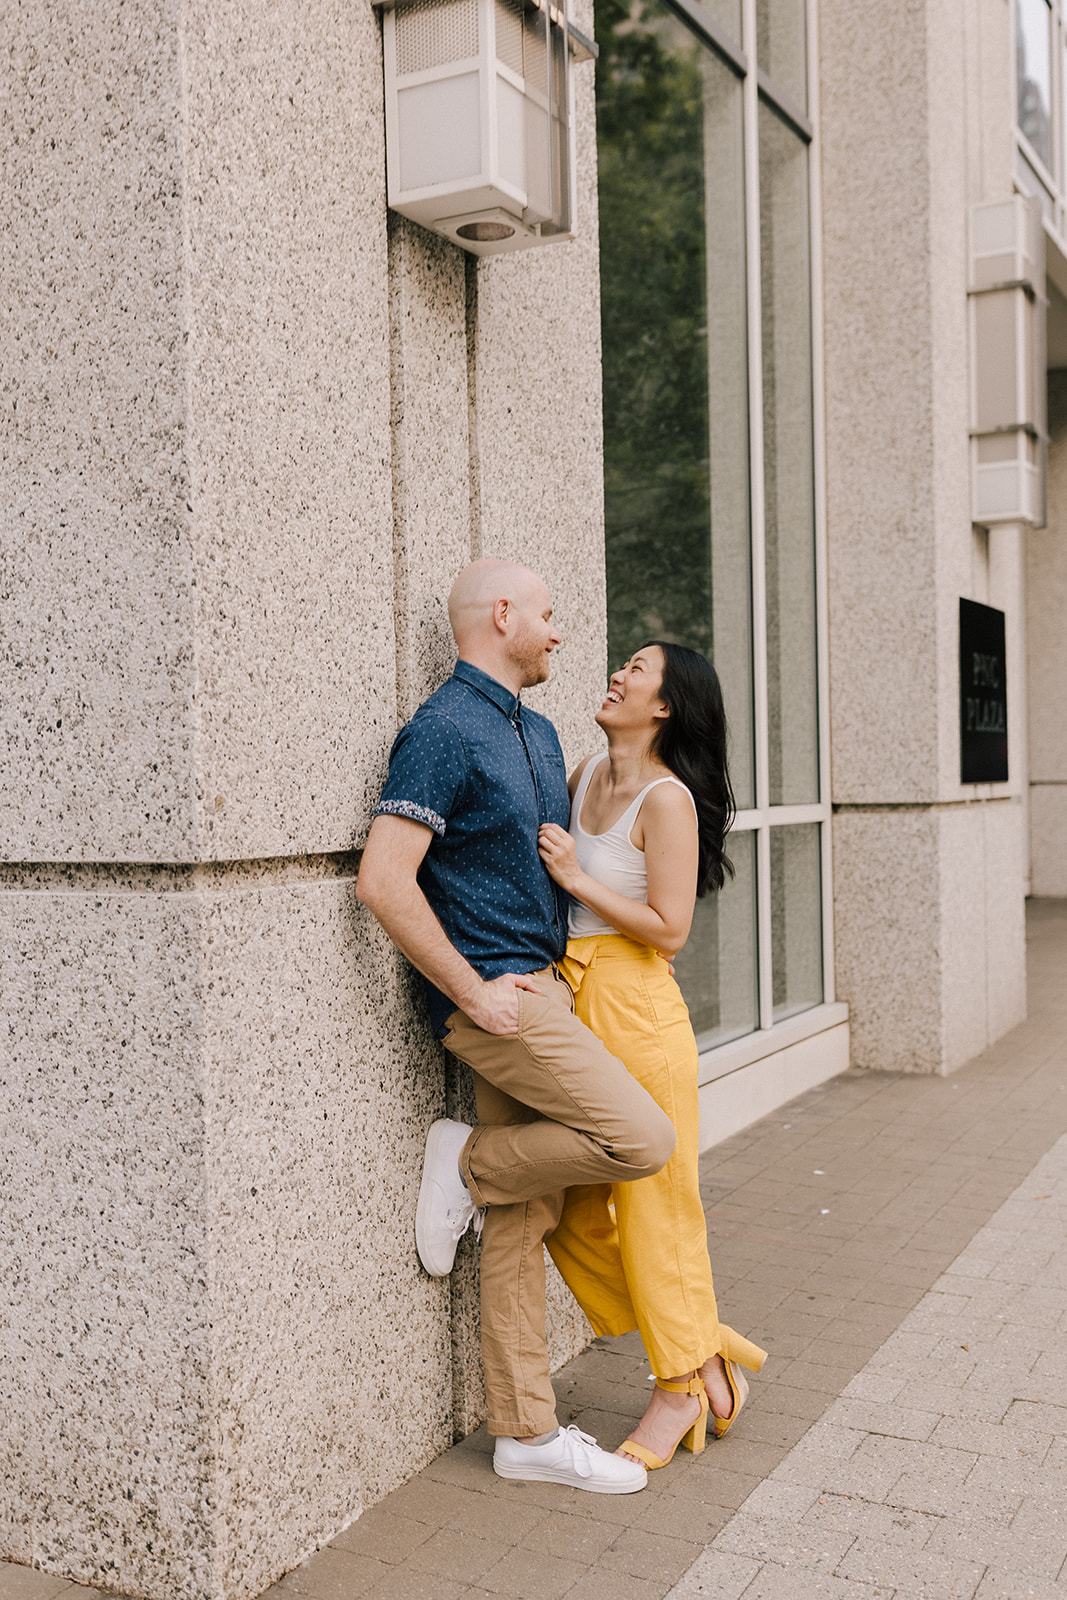 Amy Ellis Photography couples or engagement session in Downtown Raleigh, NC